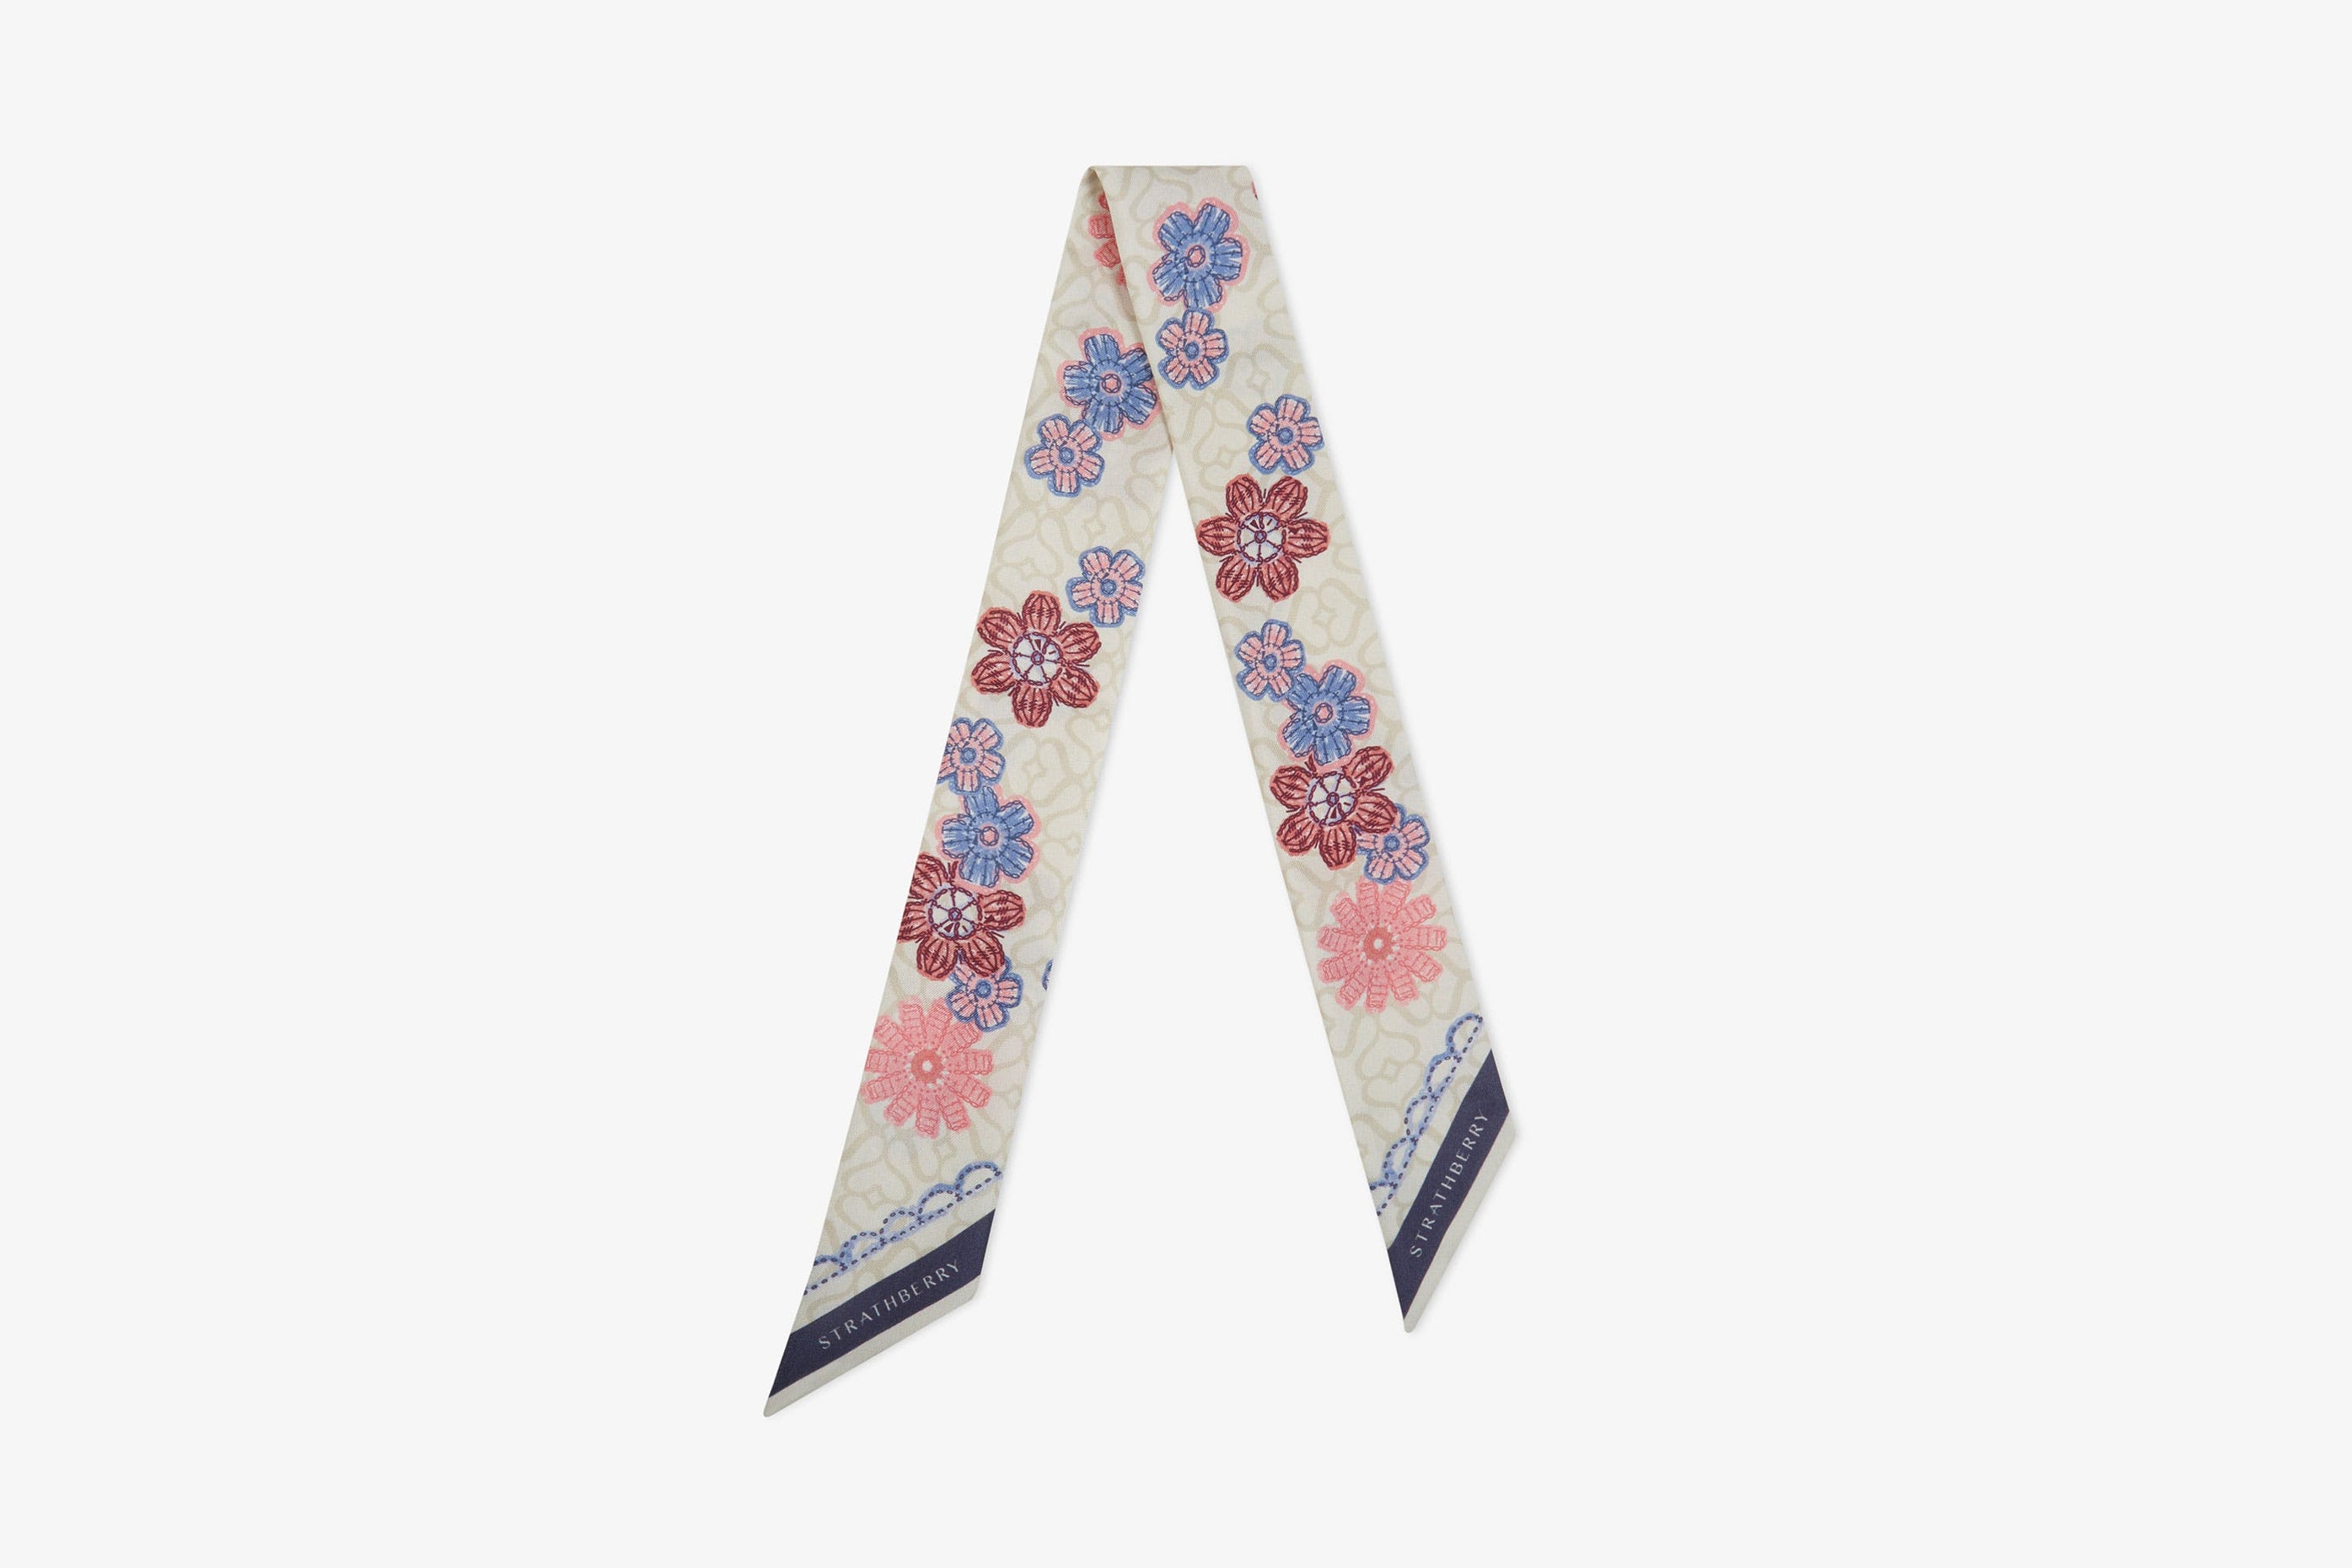 A view showcasing our Silk Skinny Scarf - Monogram Floral Print Pink/Blue